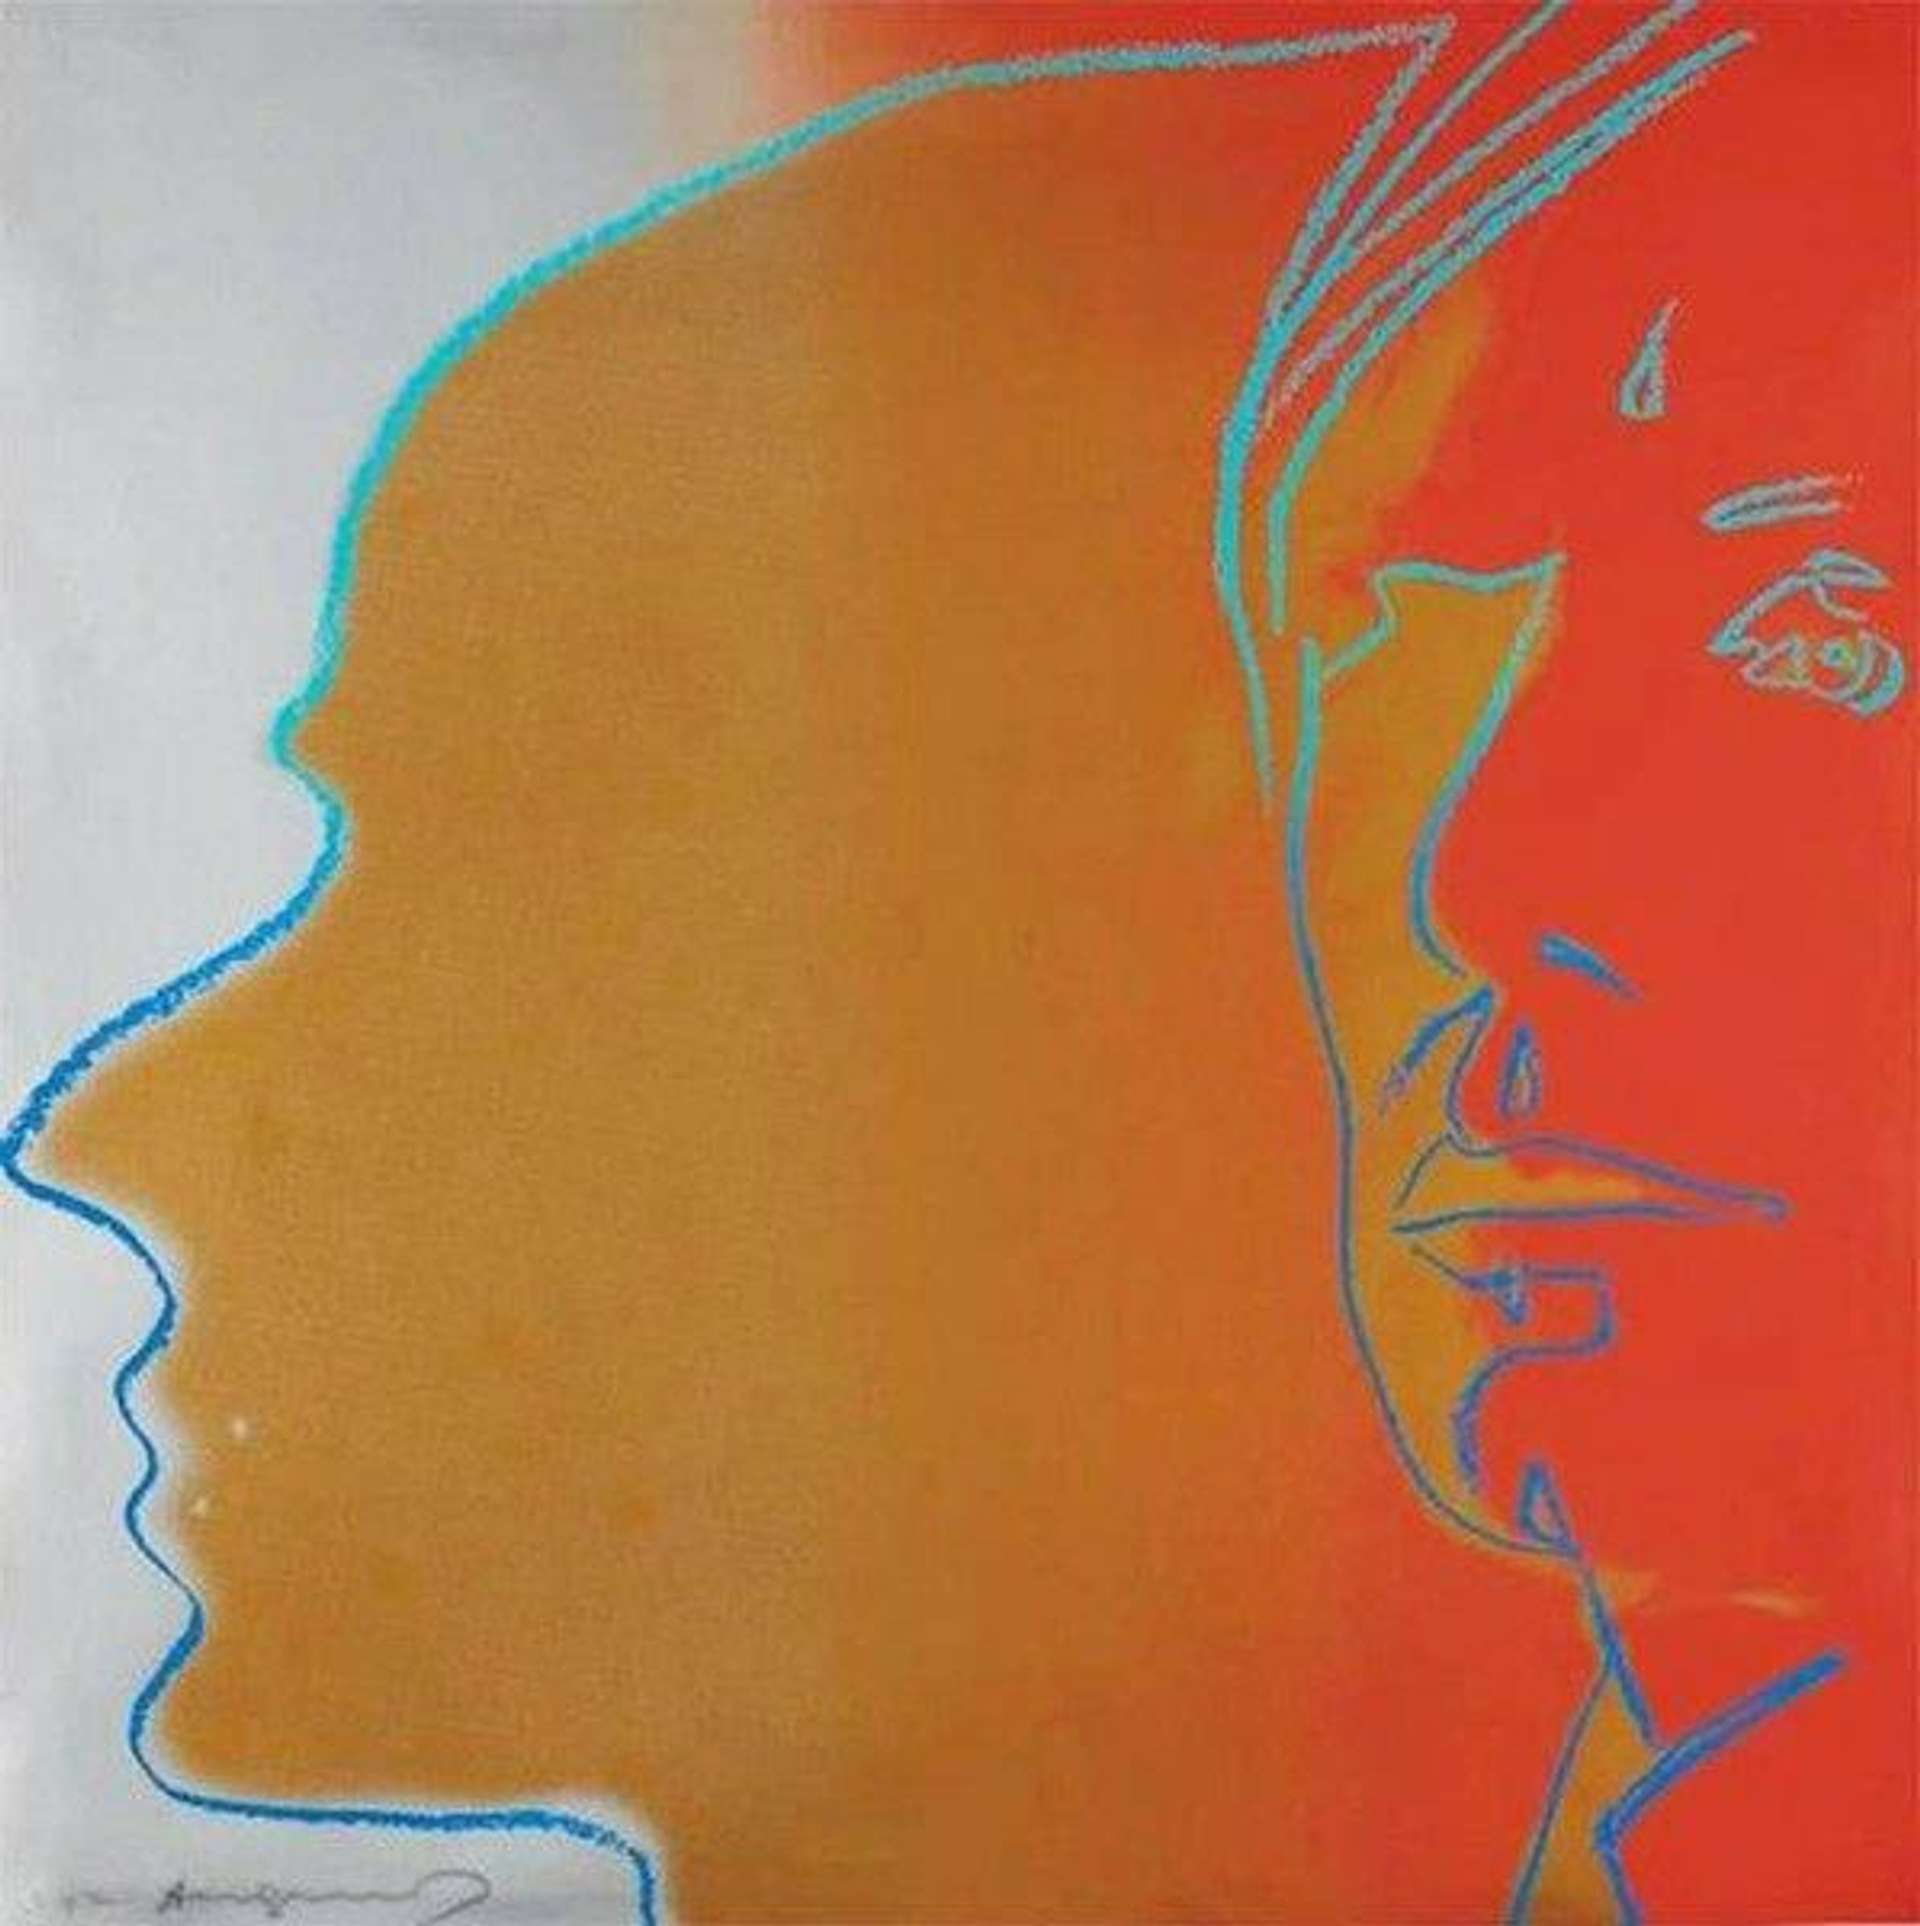 In this print, Warhol renders his portrait in a looser style, delineating the outline of his face with crayon-like blue gestural lines set against a warm red and orange backdrop. Behind Warhol’s portrait is the shadow of another figure’s profile which is staring to the left of the composition.